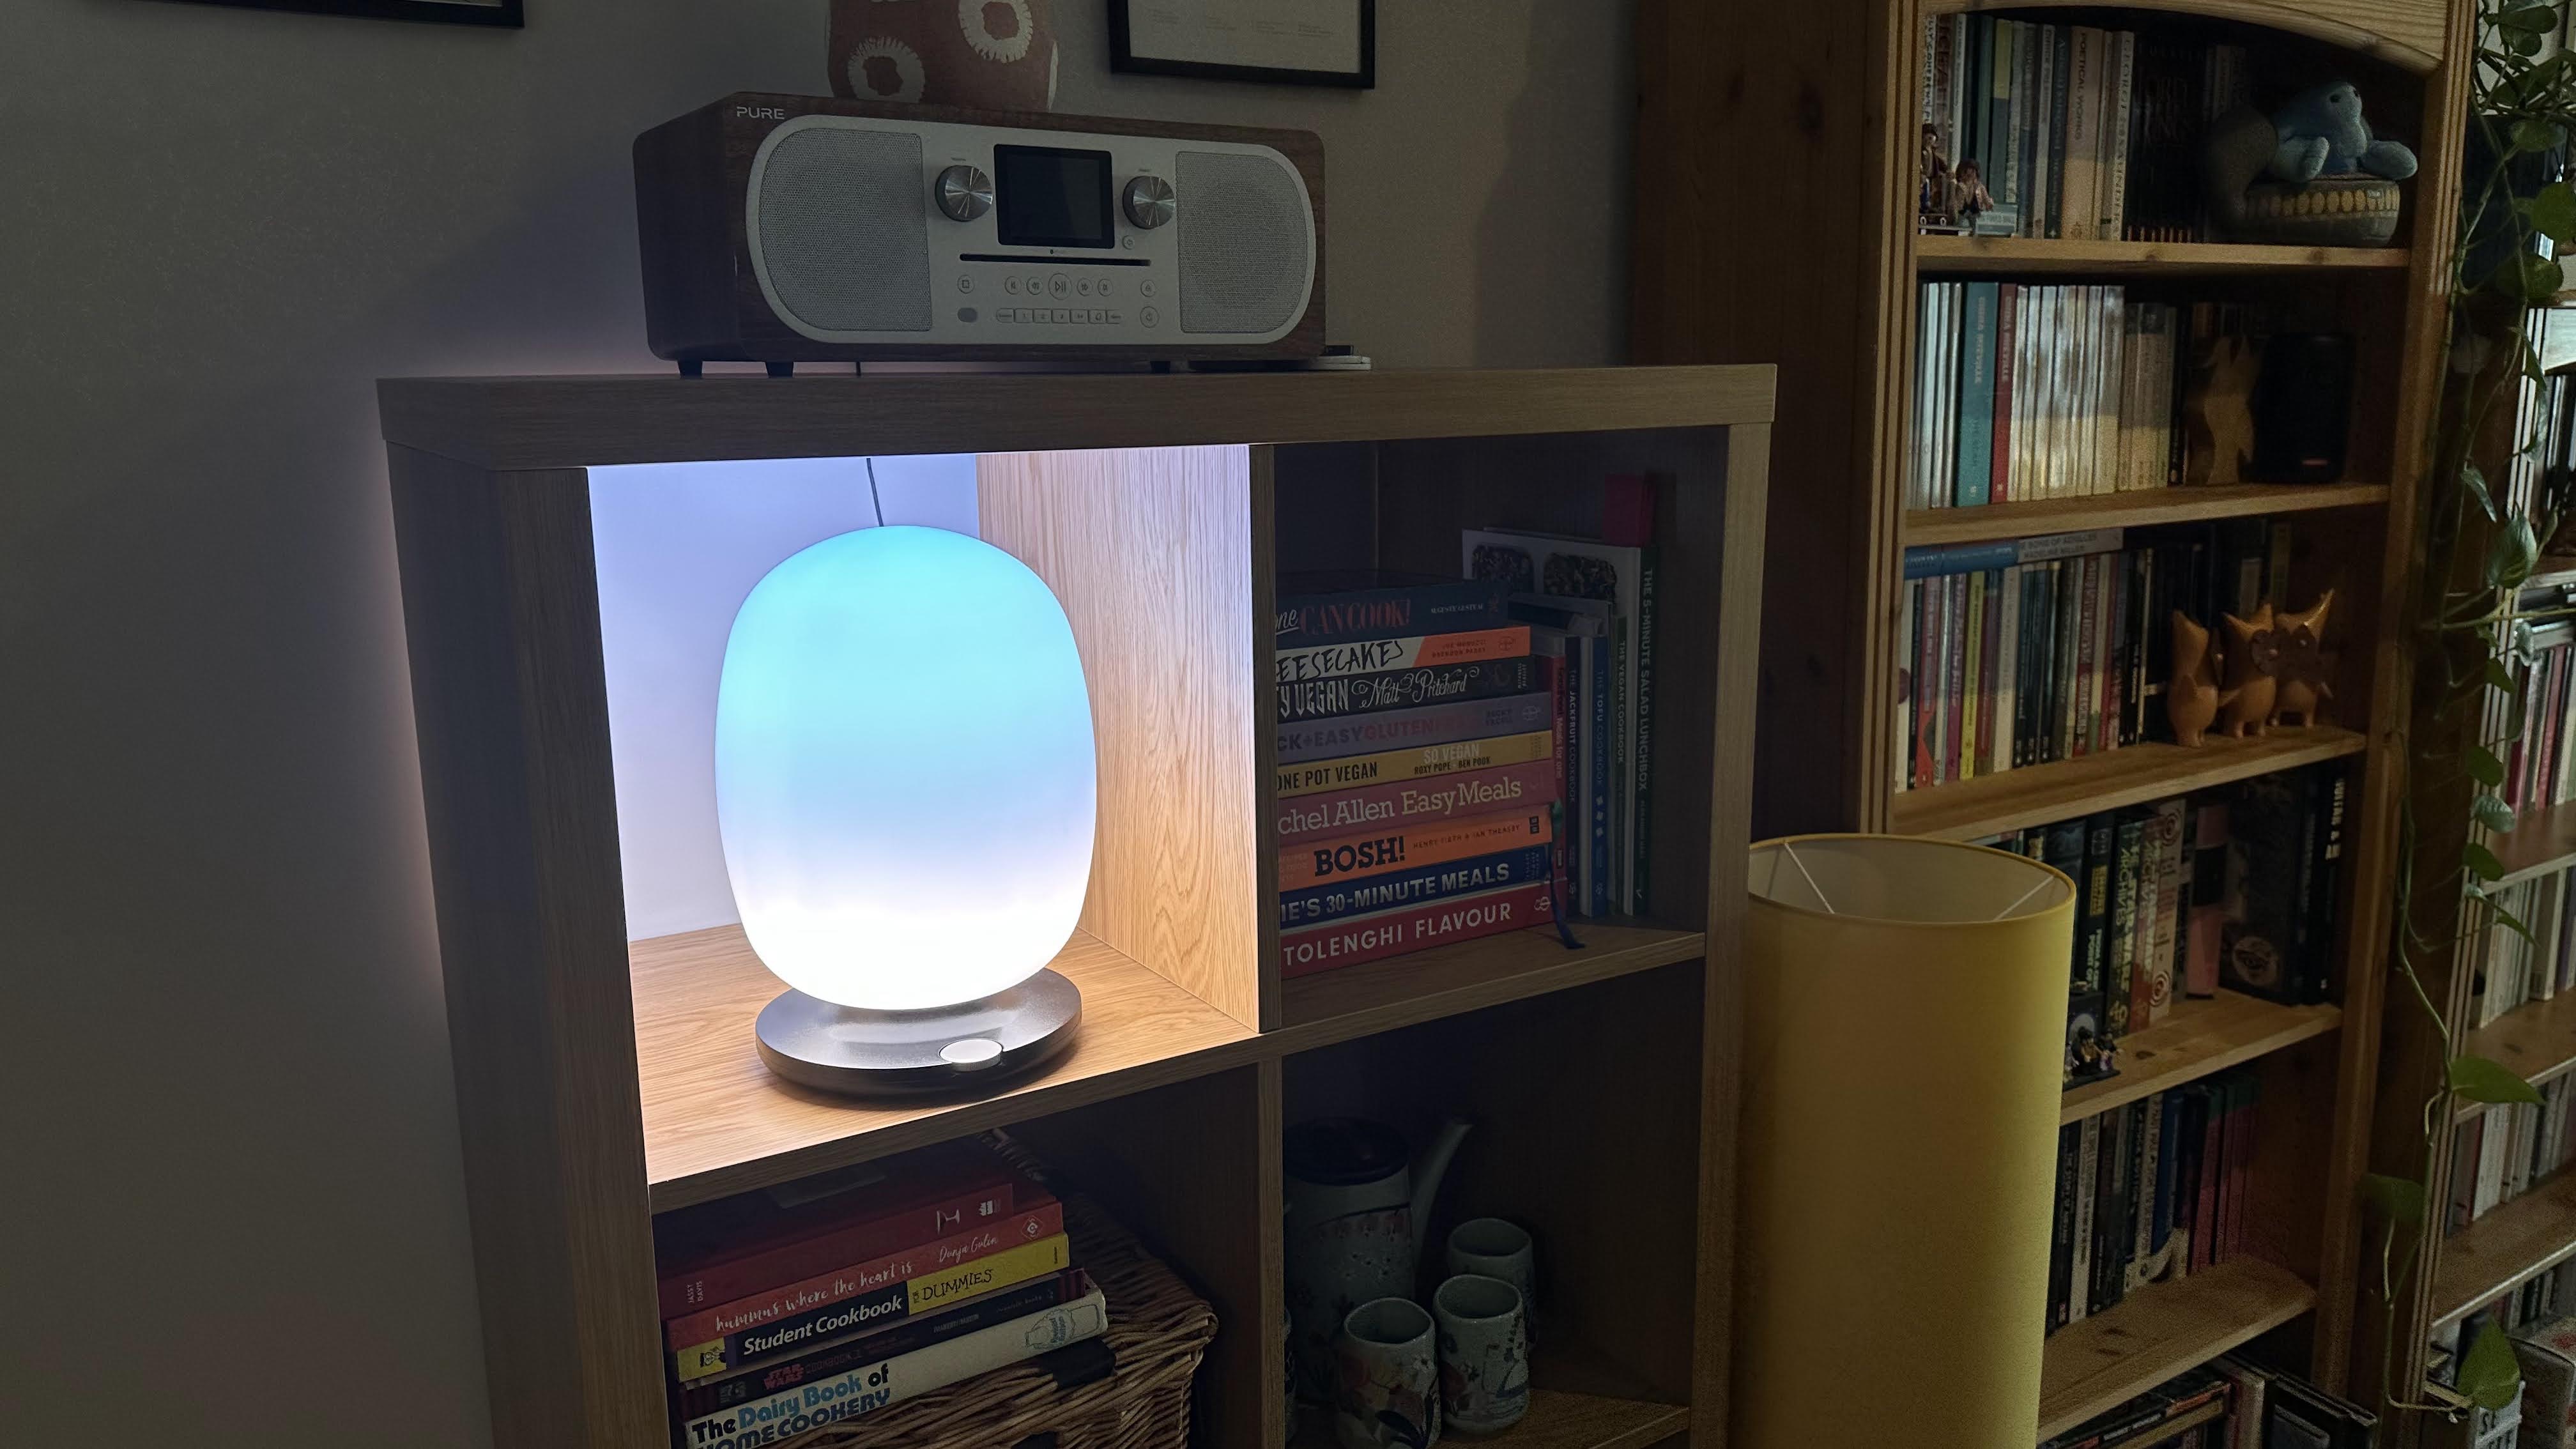 The SkyView 2 connected lamp on a wooden bookshelf